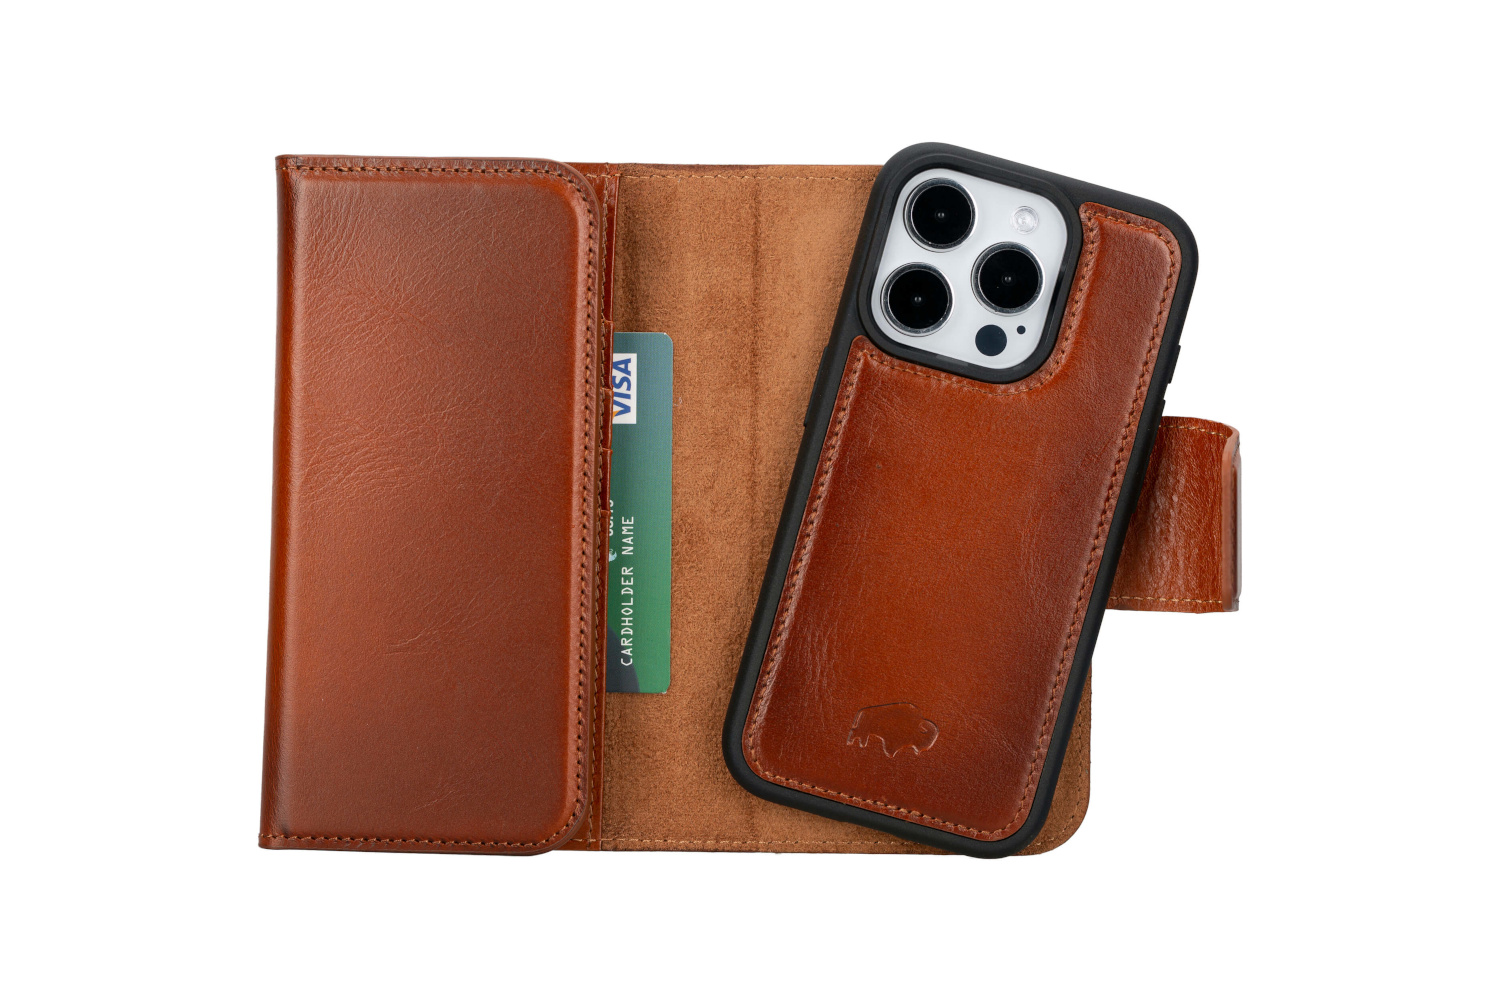 The Blackbrook Tudor leather wallet case on a blank background.